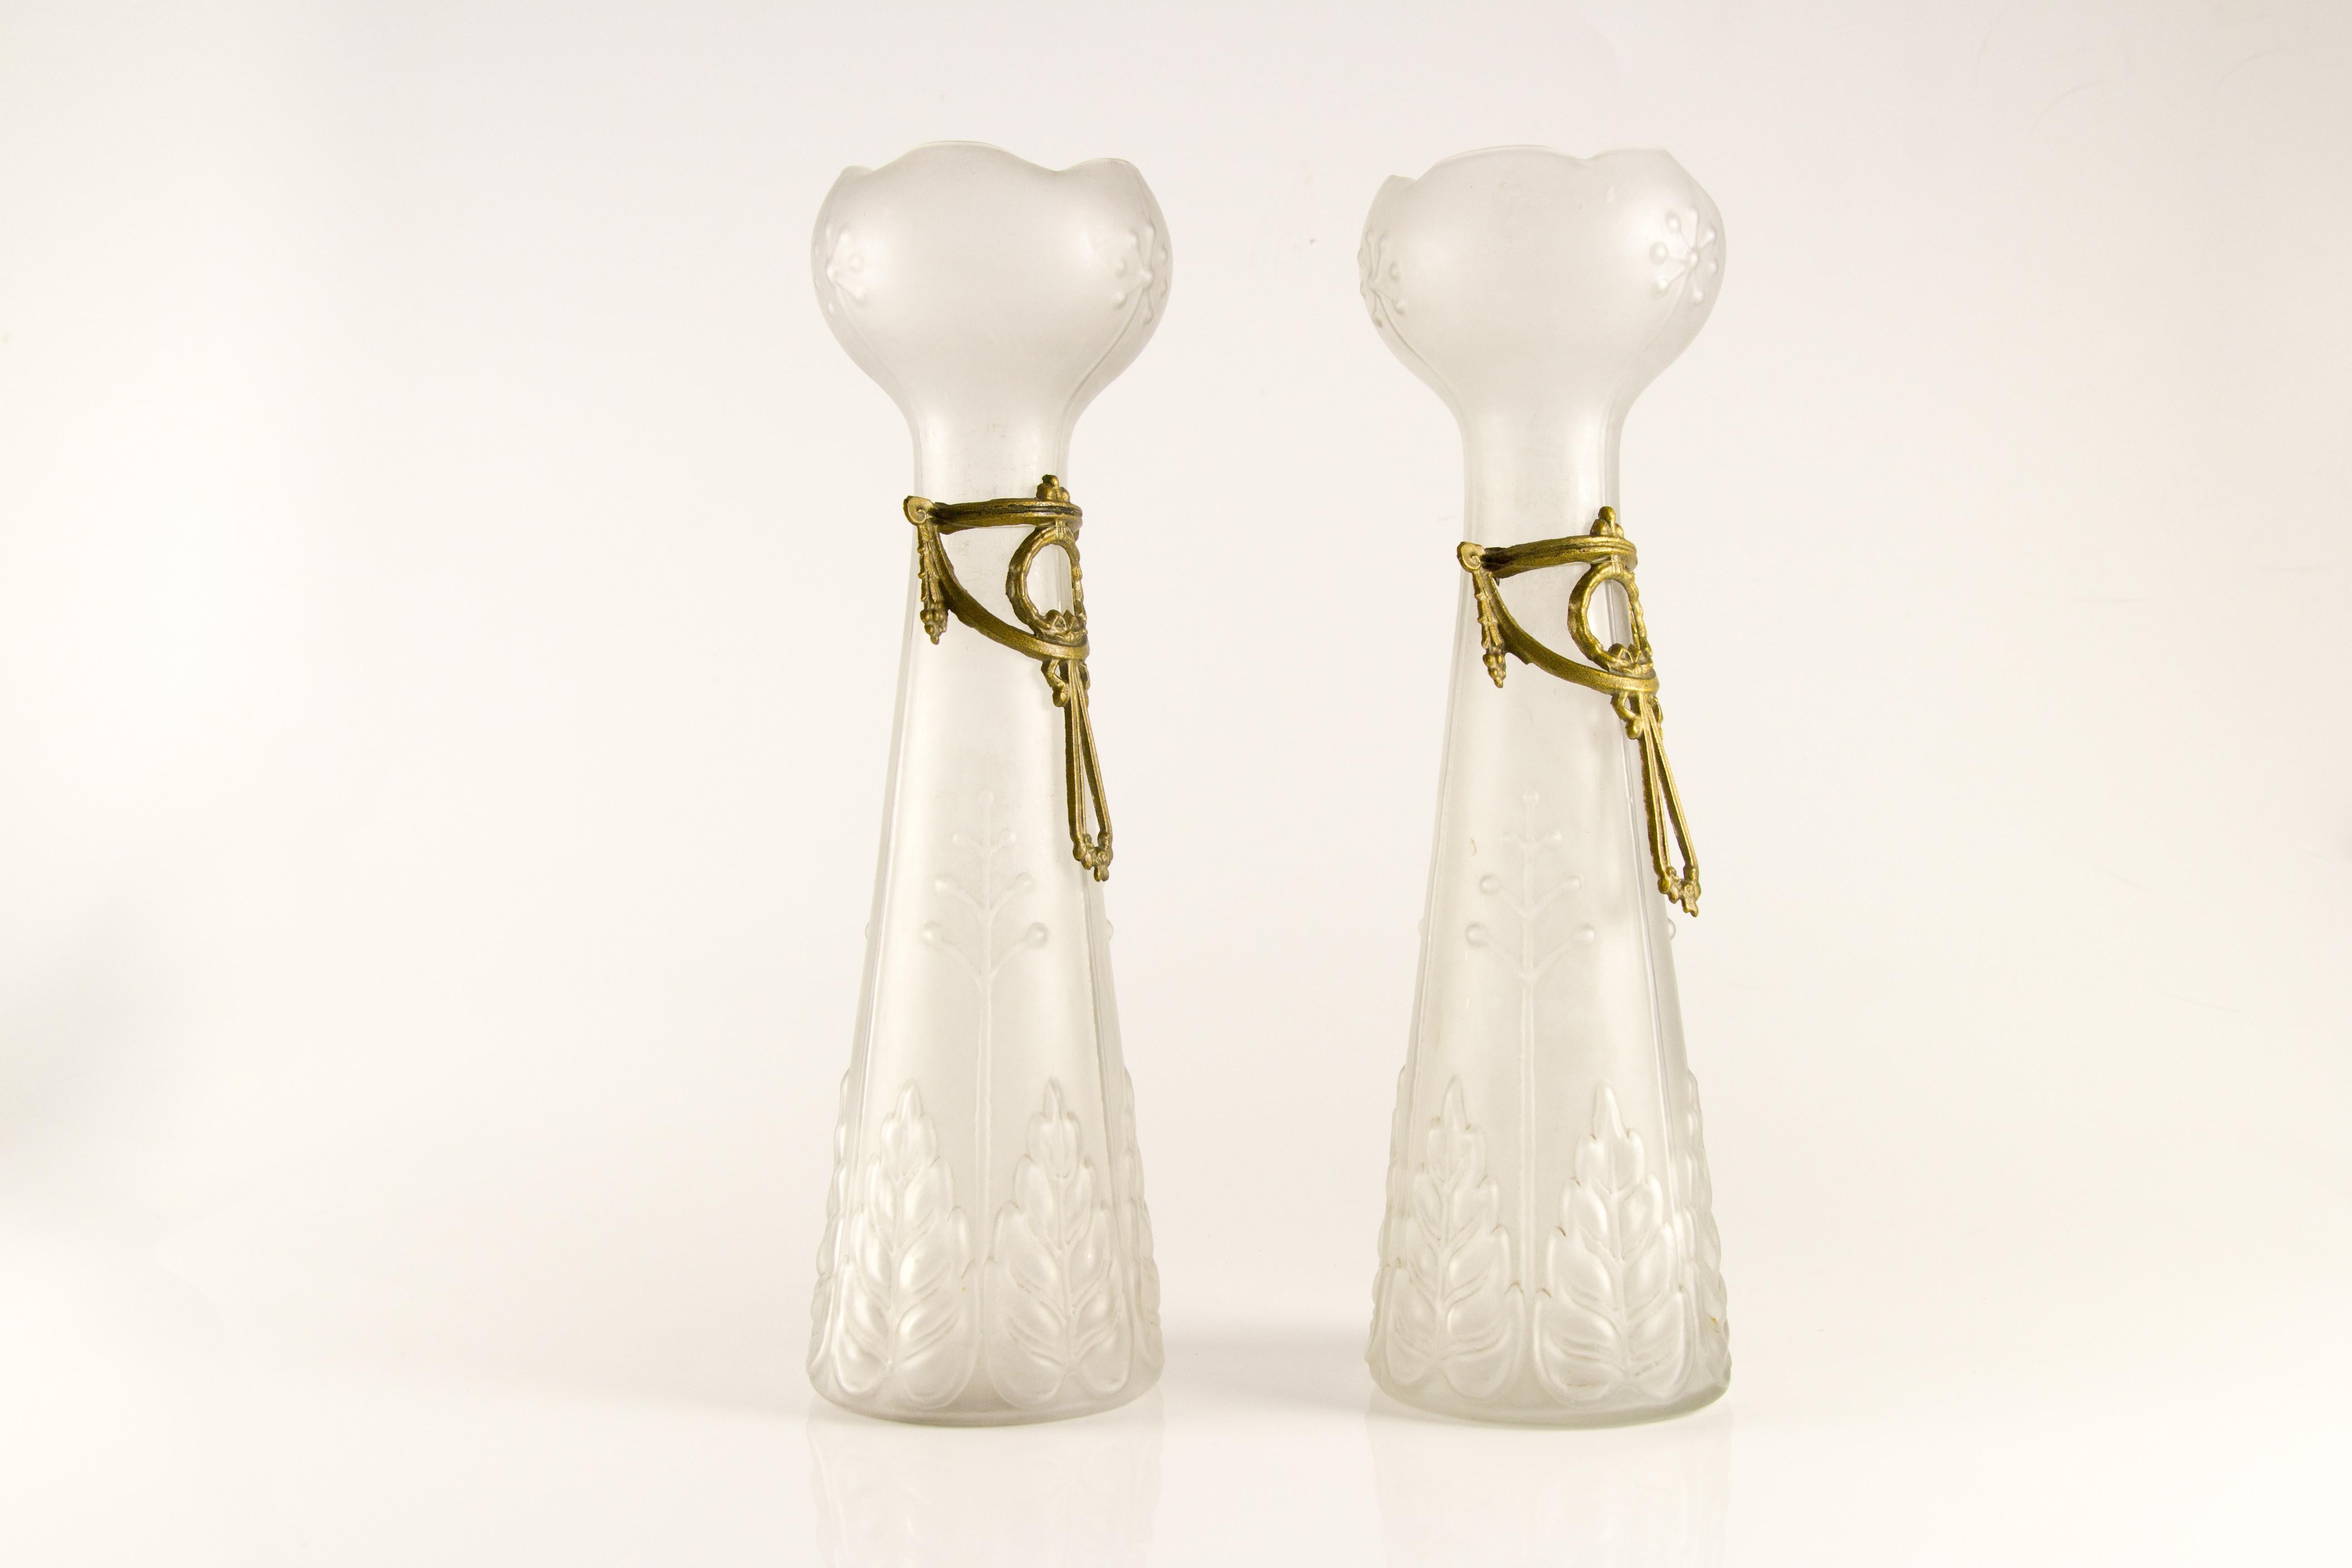 Pair of elegant French Art Nouveau frosted glass vases with brass decors.
Dimensions: height: 33 cm / 12.99 in; diameter of base: 9.5 cm / 3.74 in; diameter of top: 10 cm / 3.93 in.
 